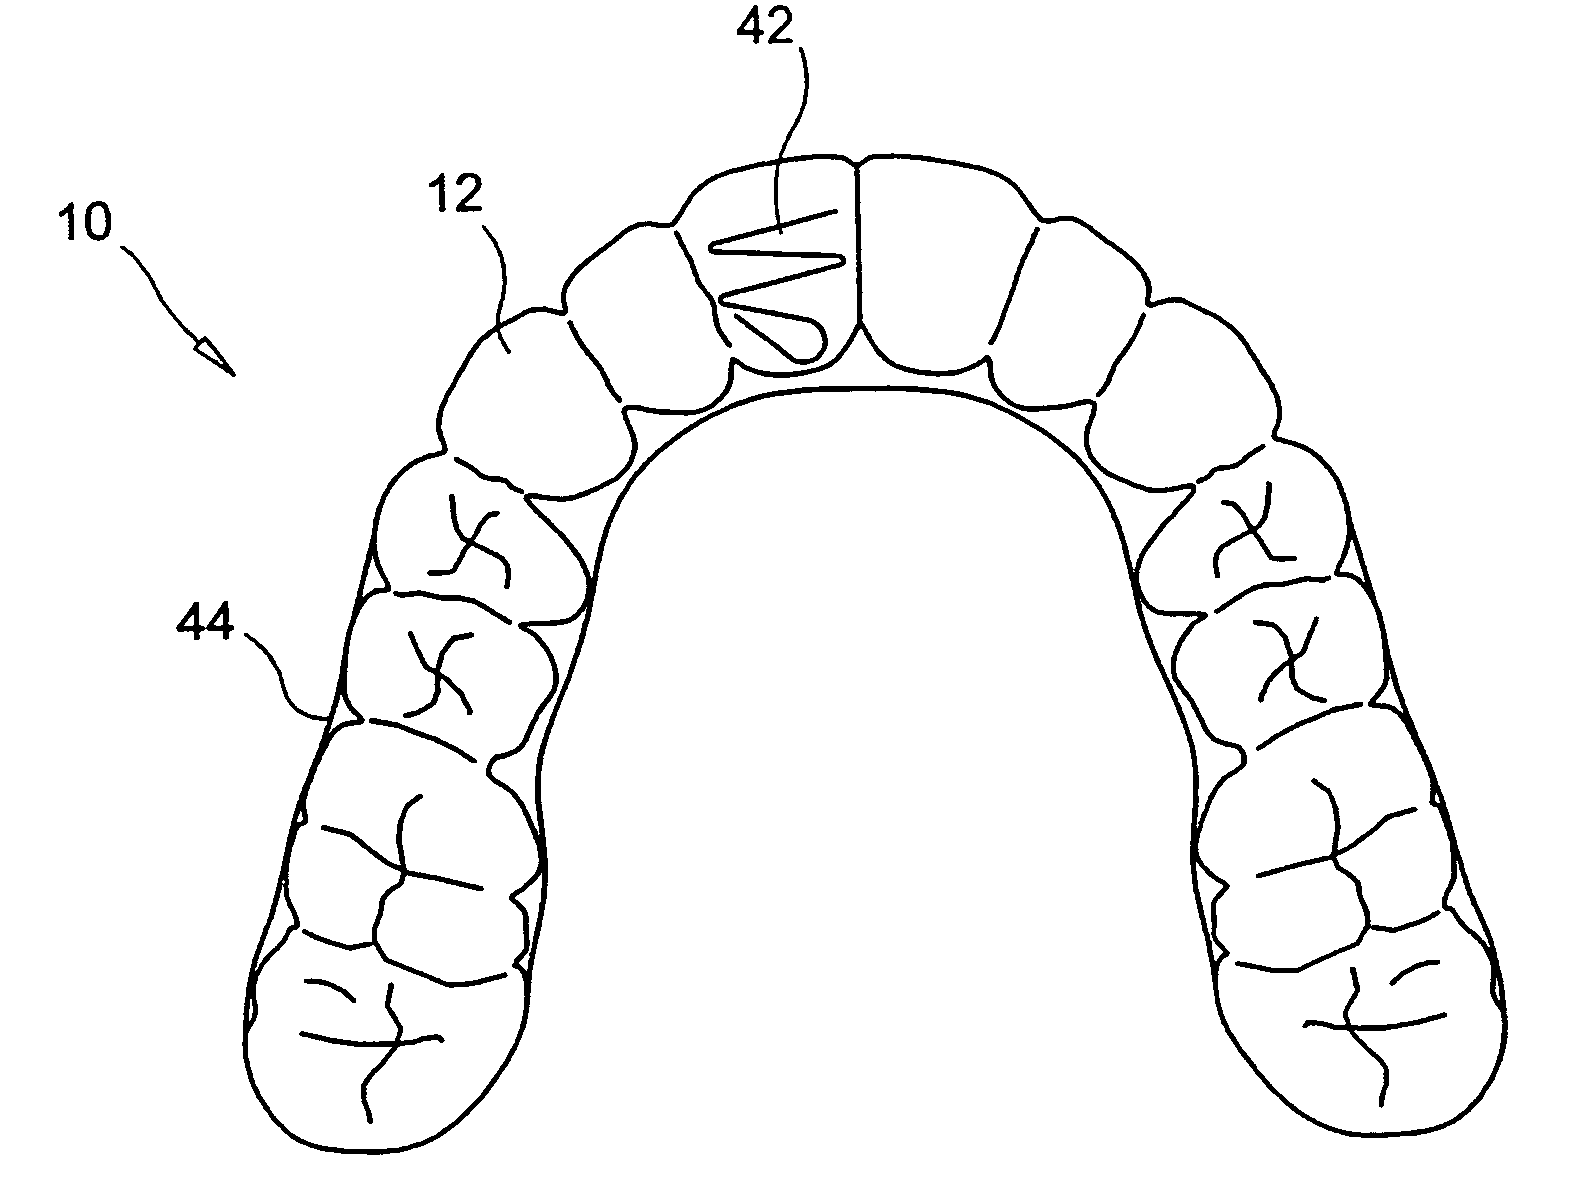 Orthodontic appliance with embedded wire for moving teeth and method